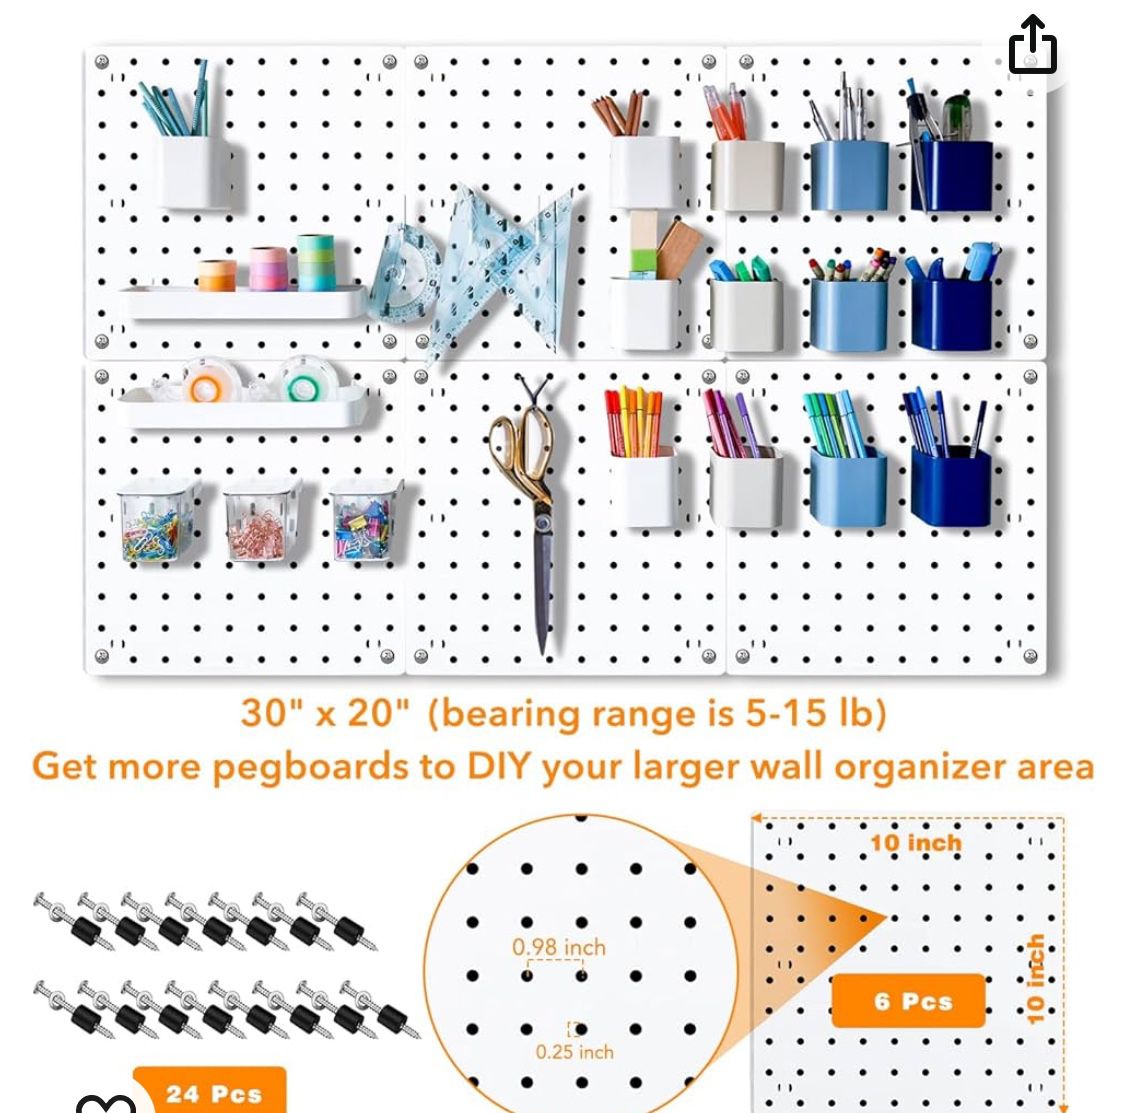 12 Tile Peg Board And Accessories 